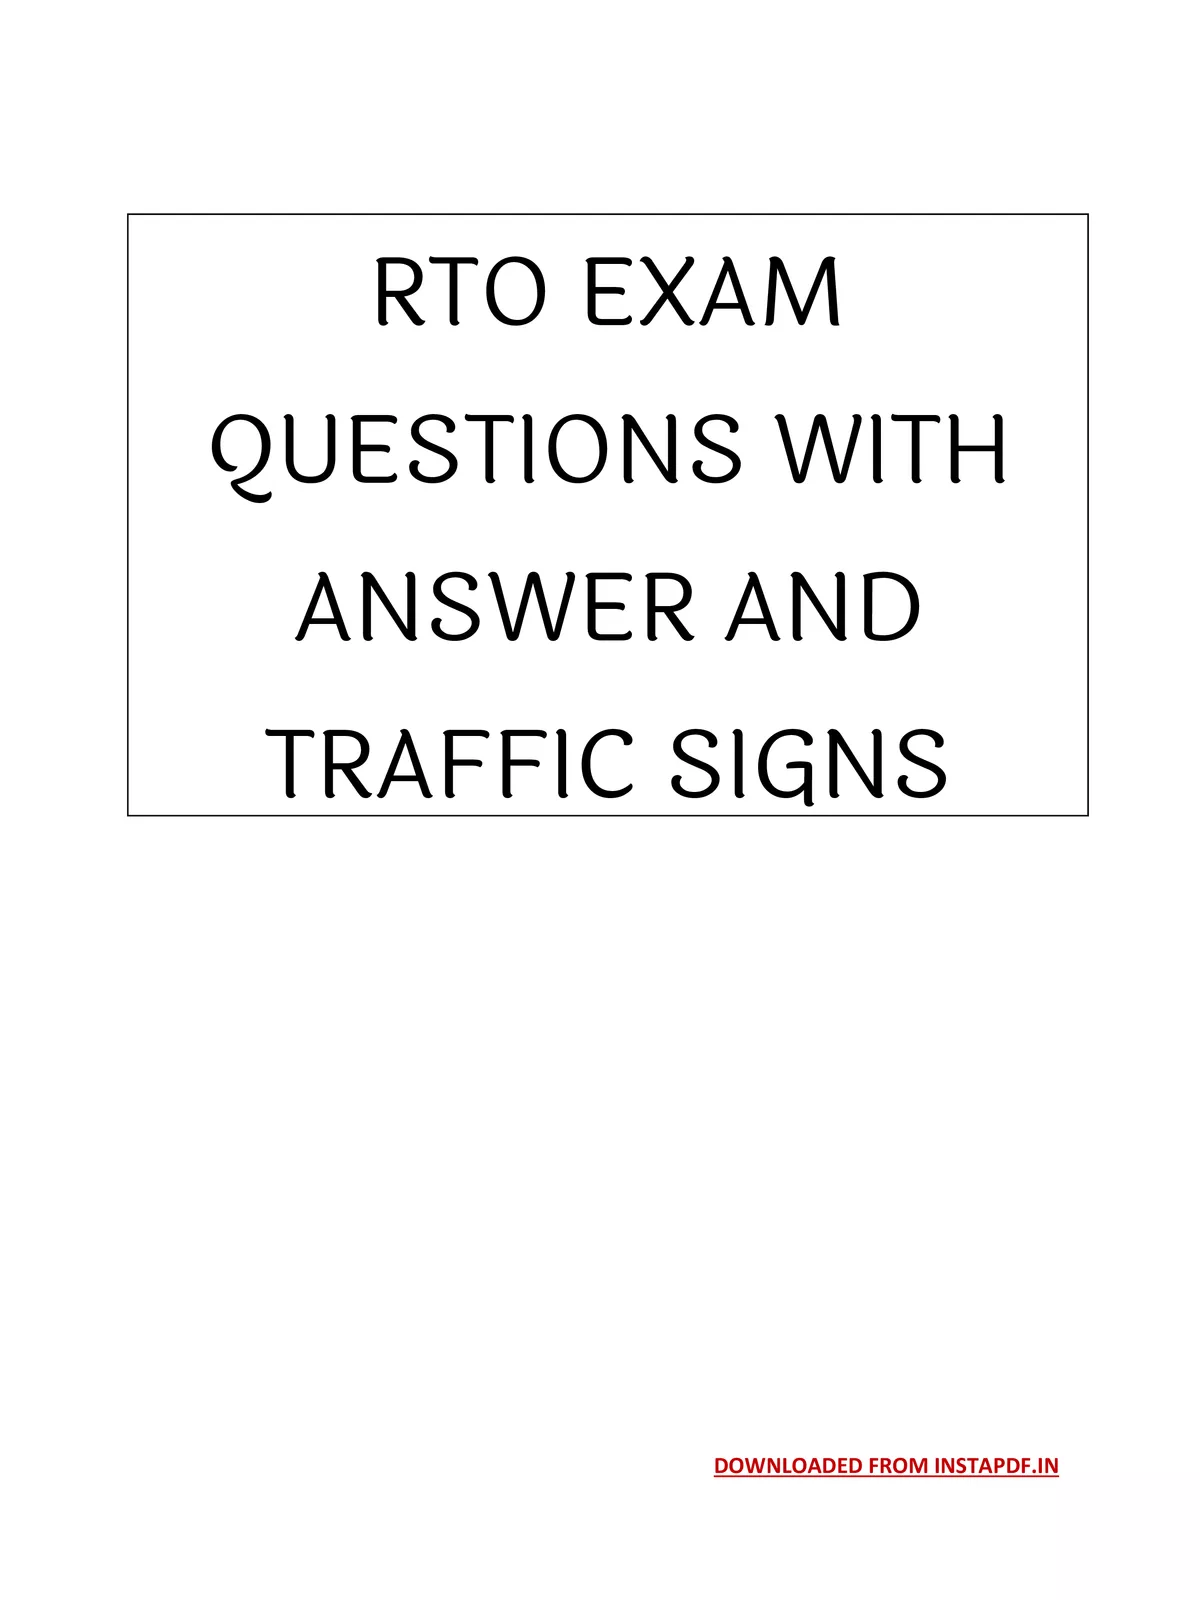 RTO Exam Questions with Answer & Traffic Sign